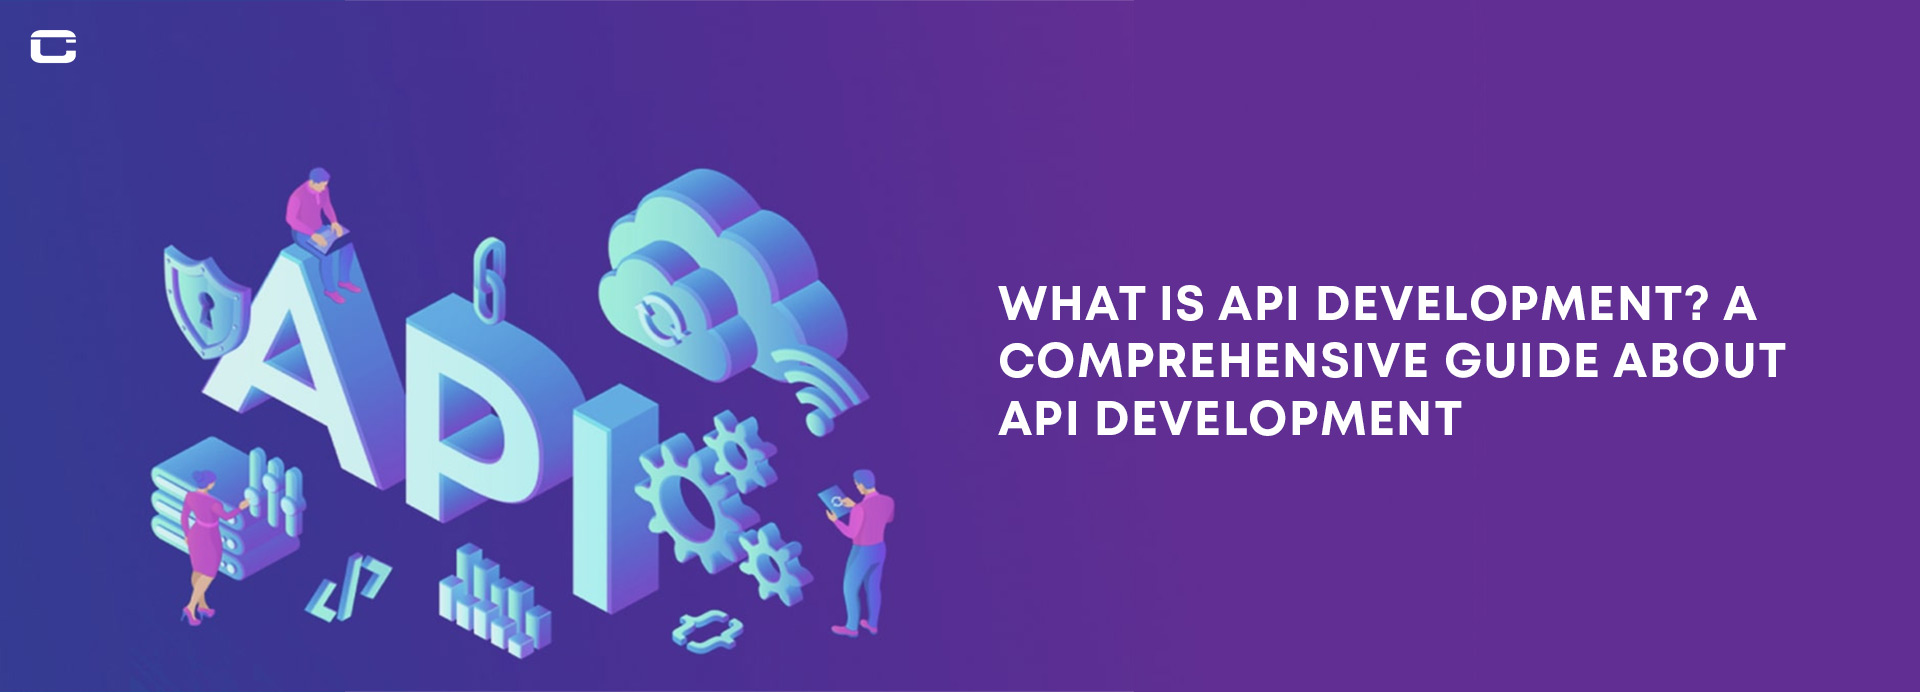 What is API Development? A Comprehensive Guide about API Development